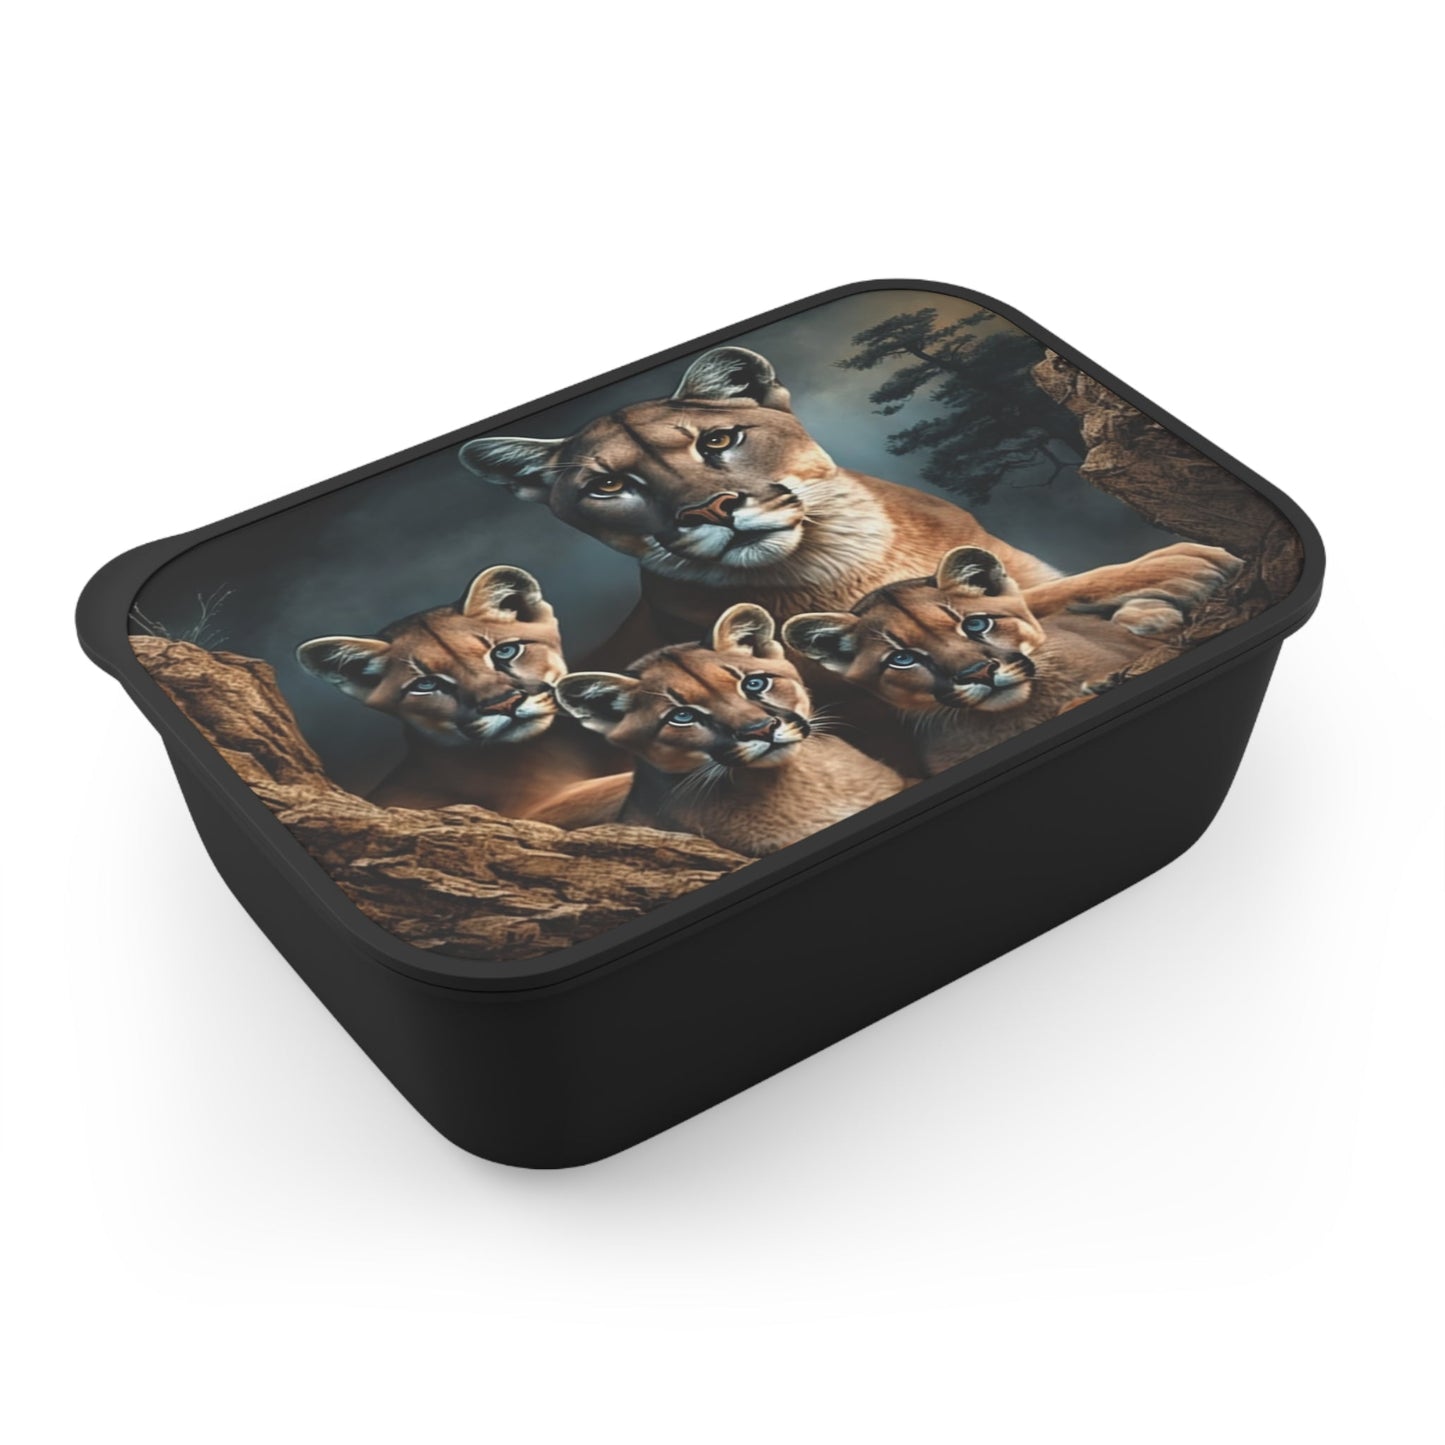 Mountain Lion Mother and Kittens | PLA Bento Box with Band and Utensils